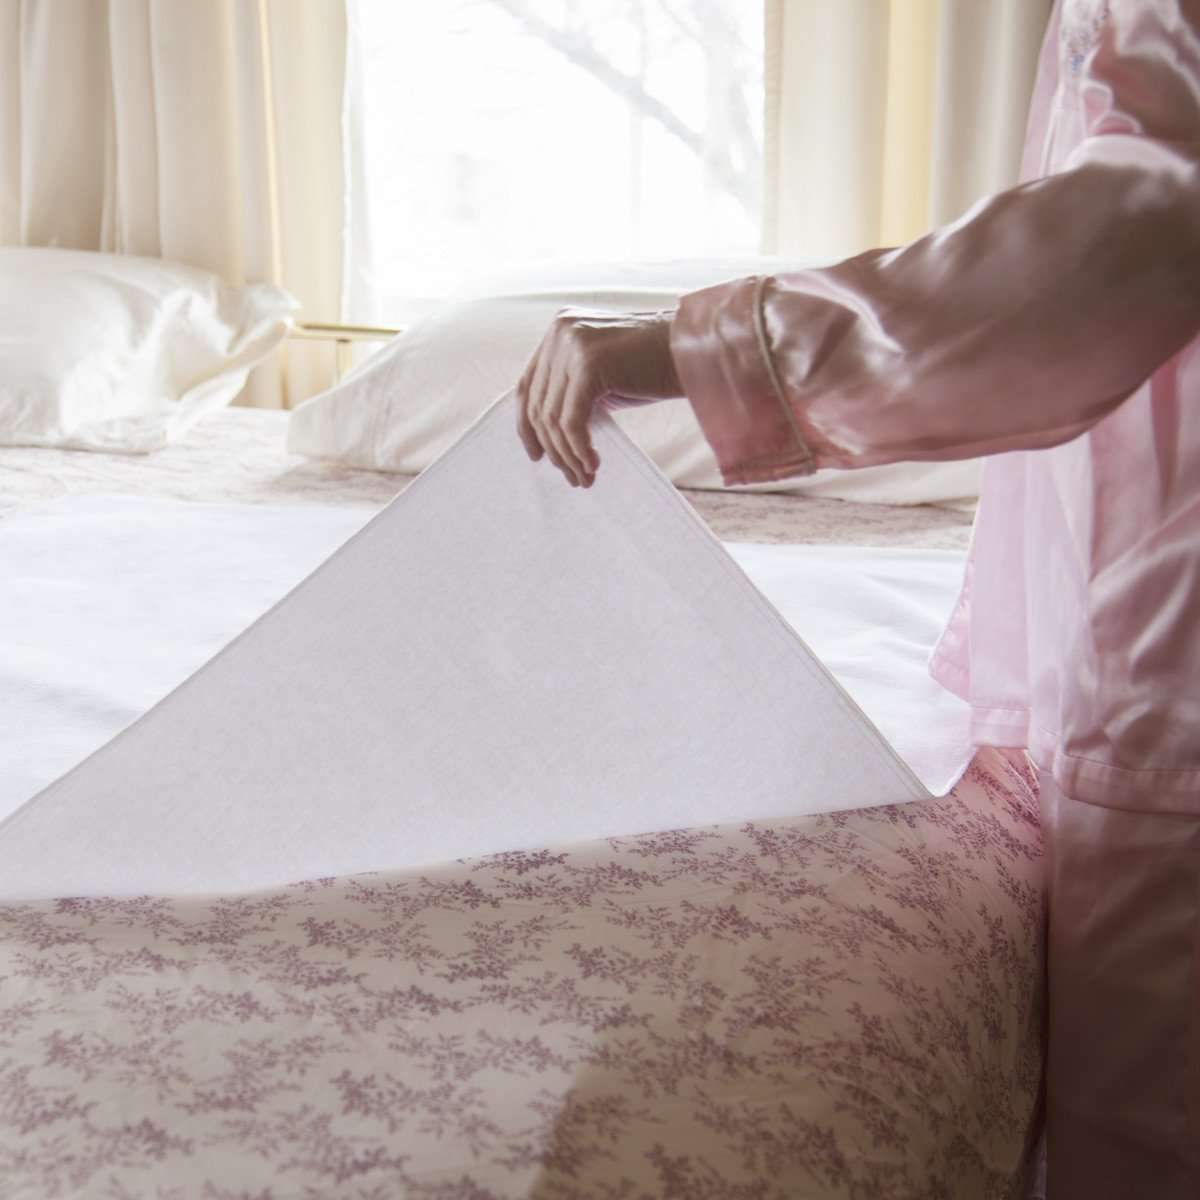 Folding Bed Board Mattress Support by DMI